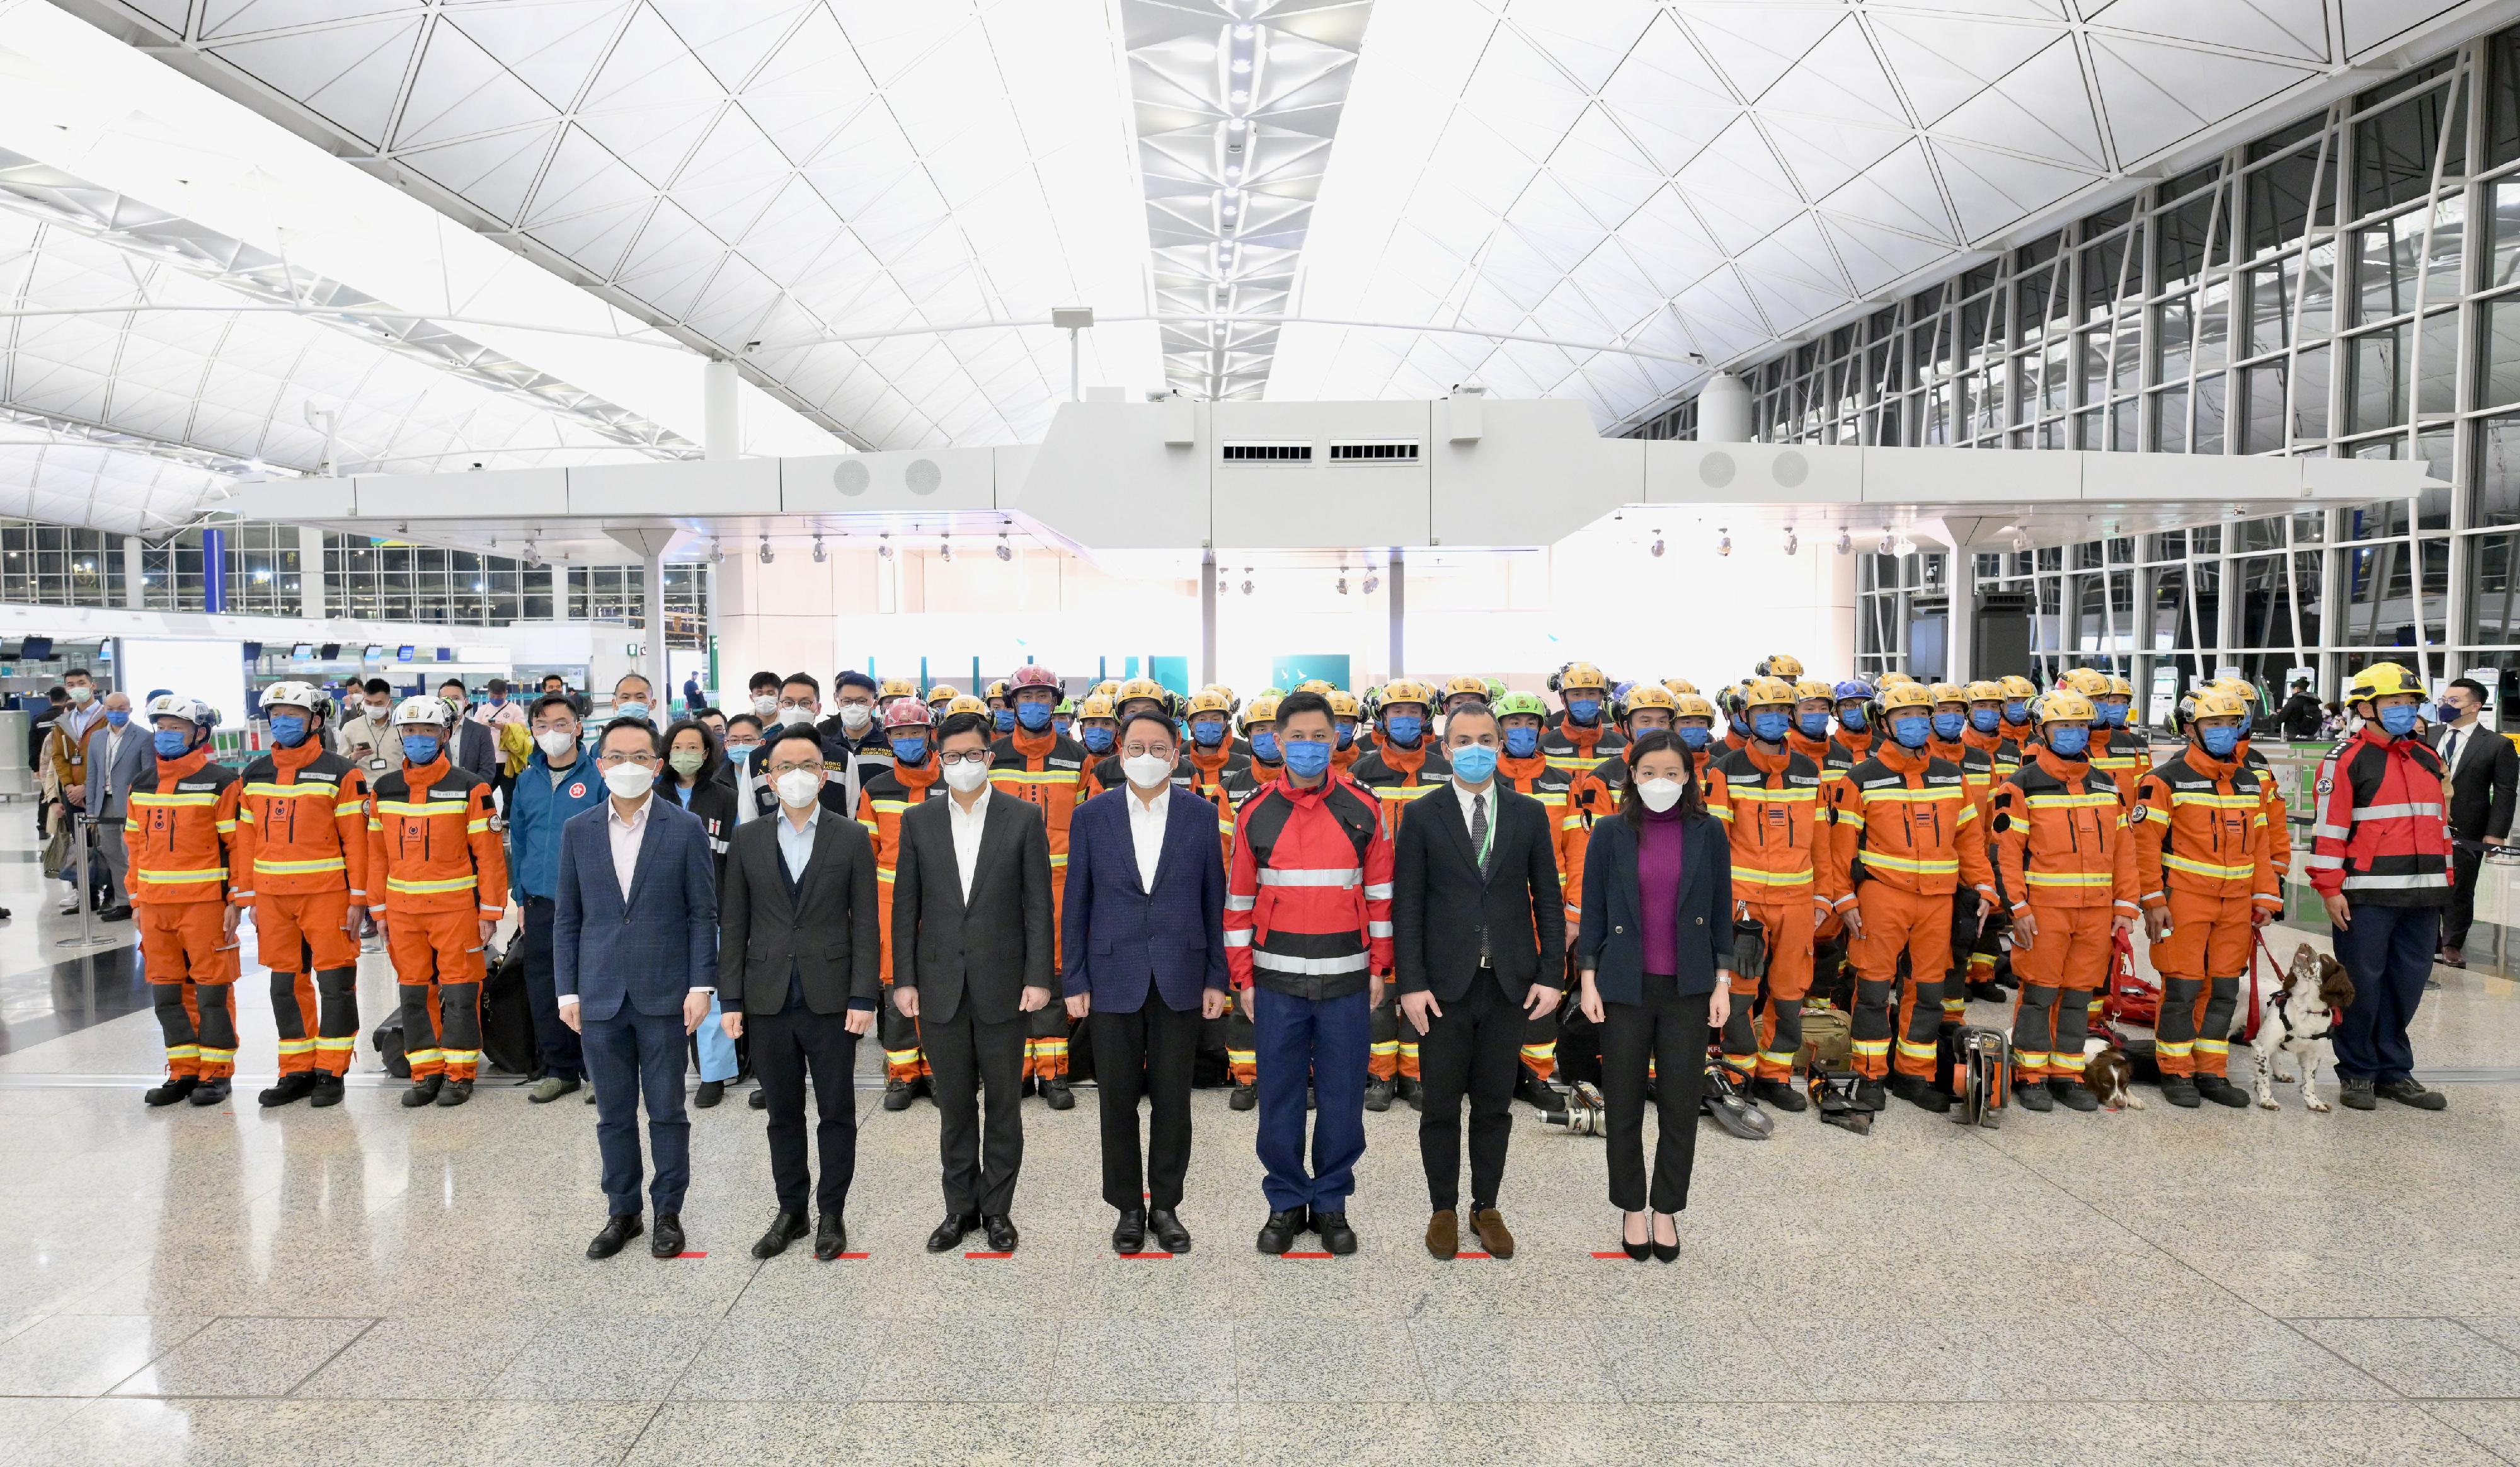 The Hong Kong Special Administrative Region (HKSAR) Government sent a 59-strong search and rescue team to the quake-stricken areas in Türkiye tonight (February 8) to assist in the search and rescue work. Photo shows (front row, from left) the Director of Health, Dr Ronald Lam; the Permanent Secretary for Security, Mr Patrick Li; the Secretary for Security, Mr Tang Ping-keung; the Acting Chief Executive, Mr Chan Kwok-ki; the Director of Fire Services, Mr Andy Yeung; the Consul General of Türkiye in Hong Kong, Mr Peyami Kalyoncu; and the HKSAR search and rescue team.